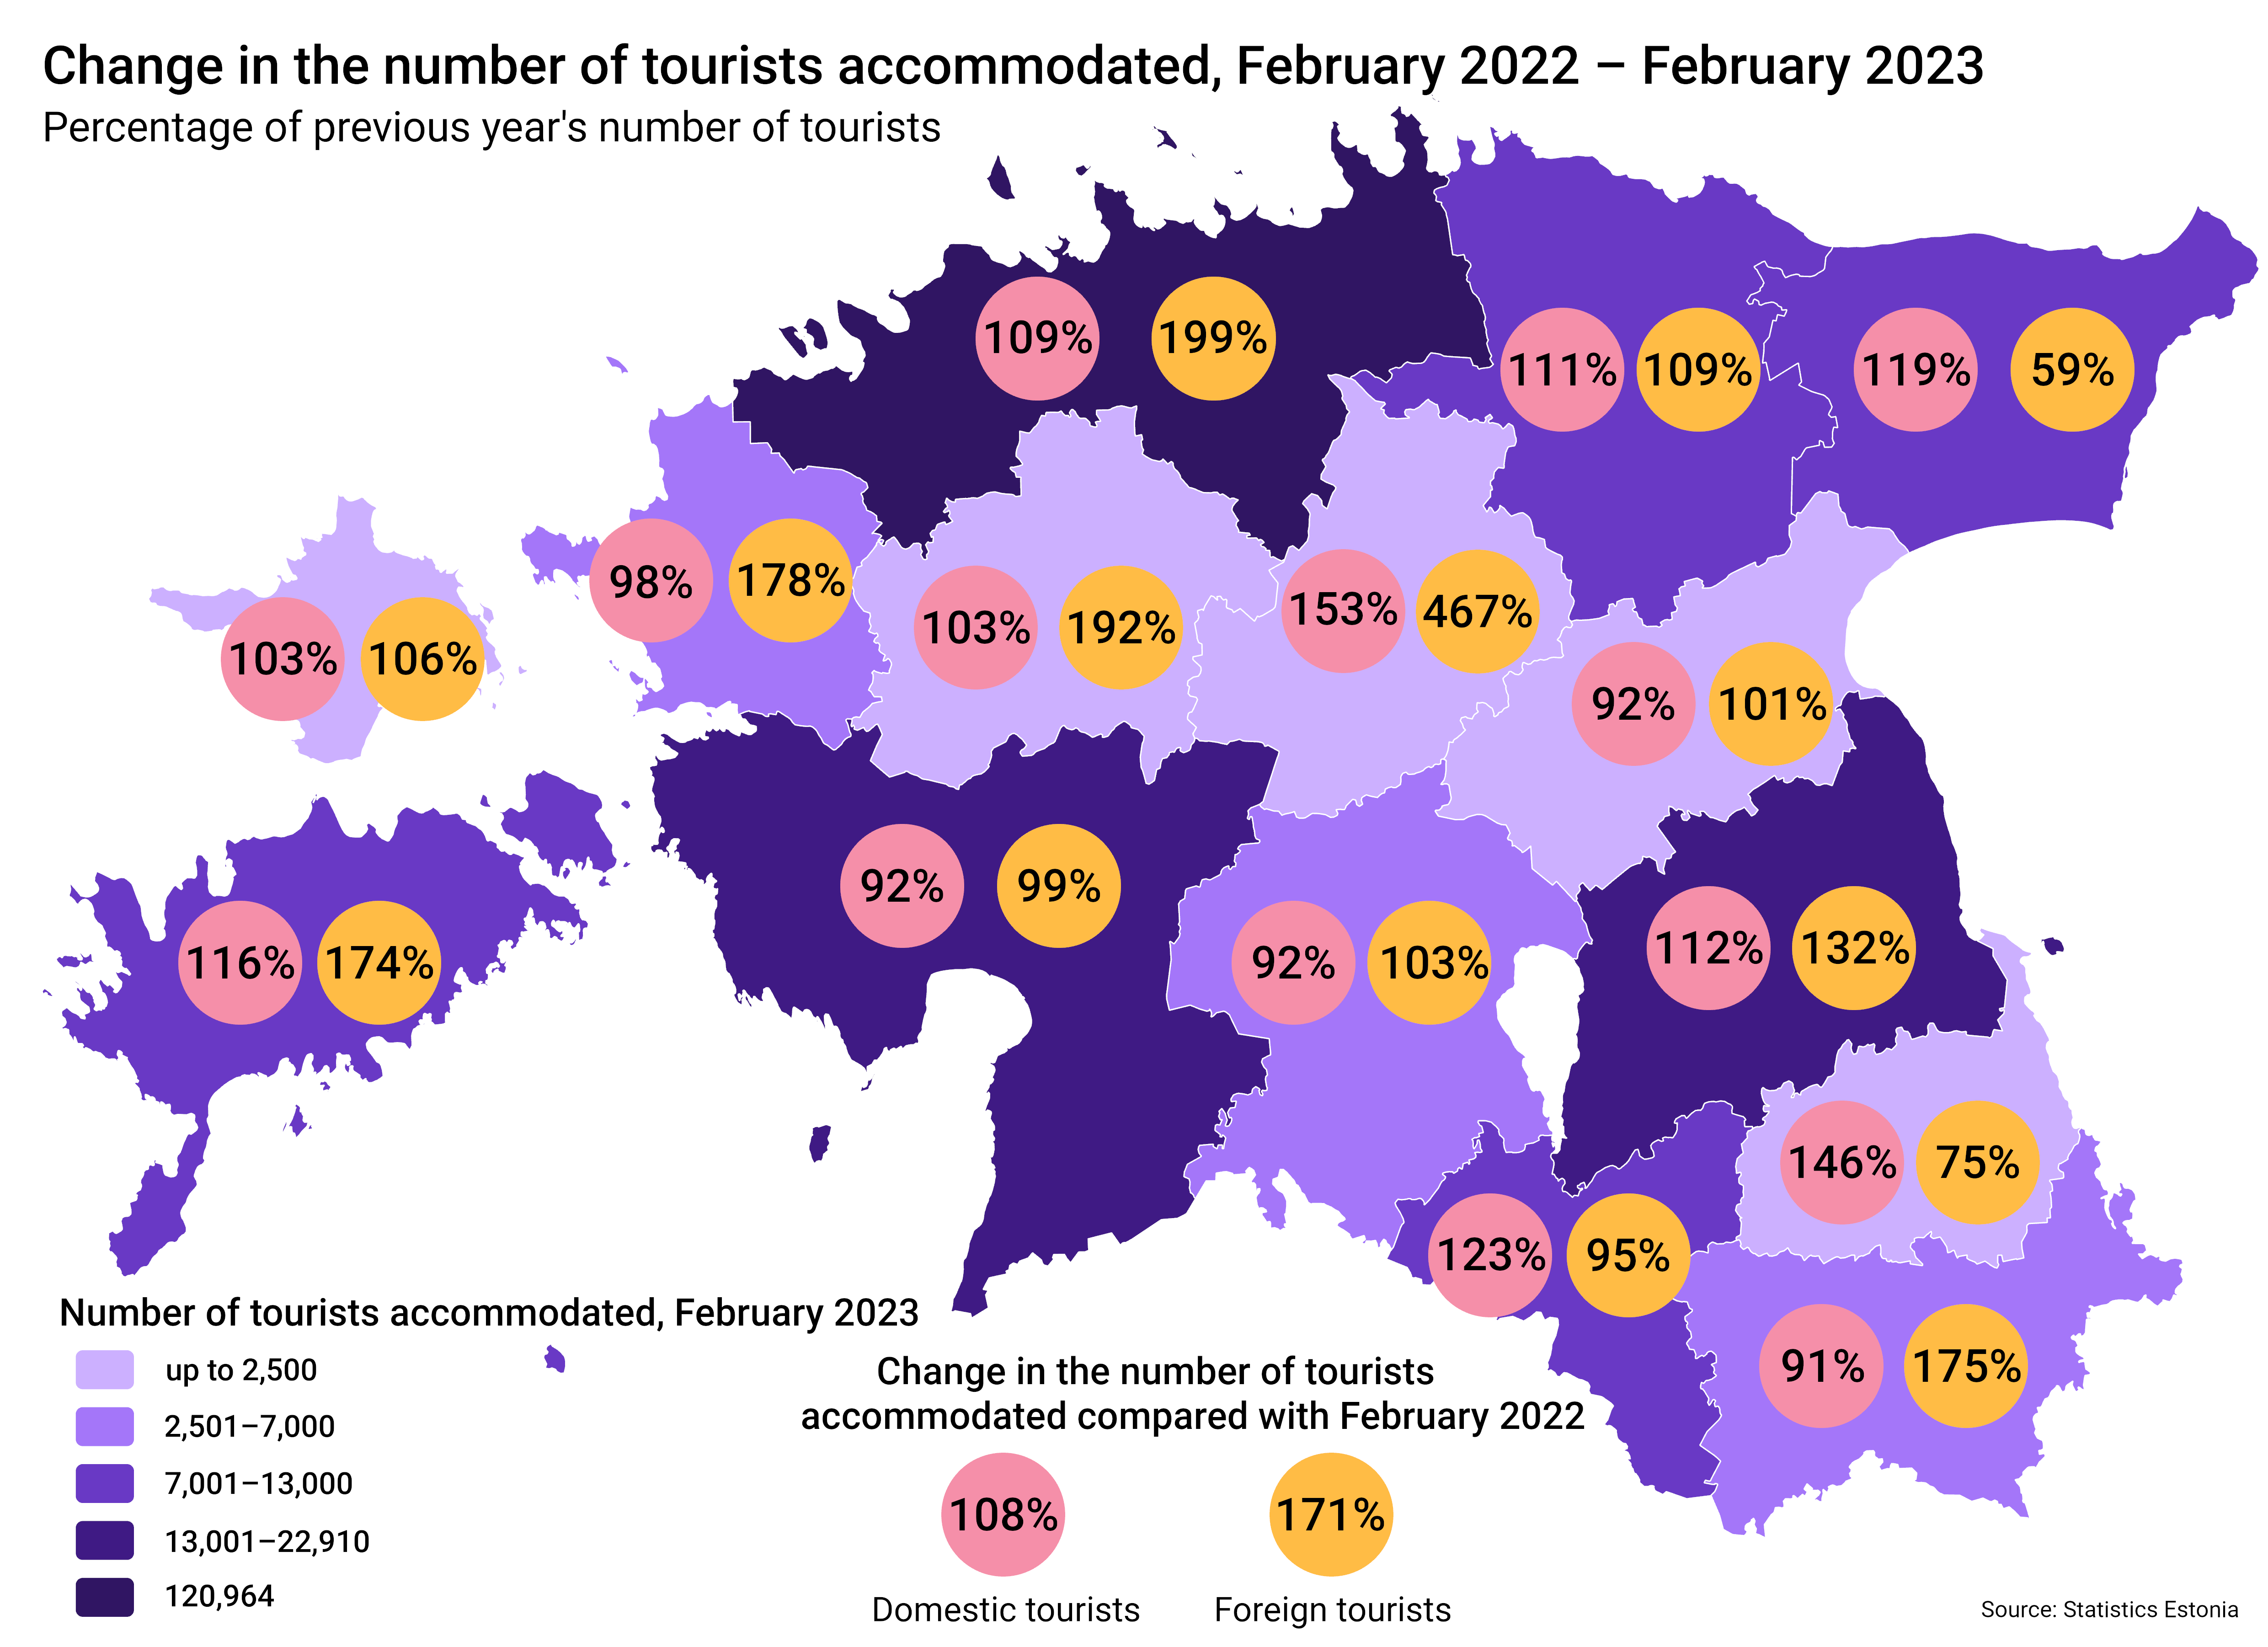 Change in number of tourists